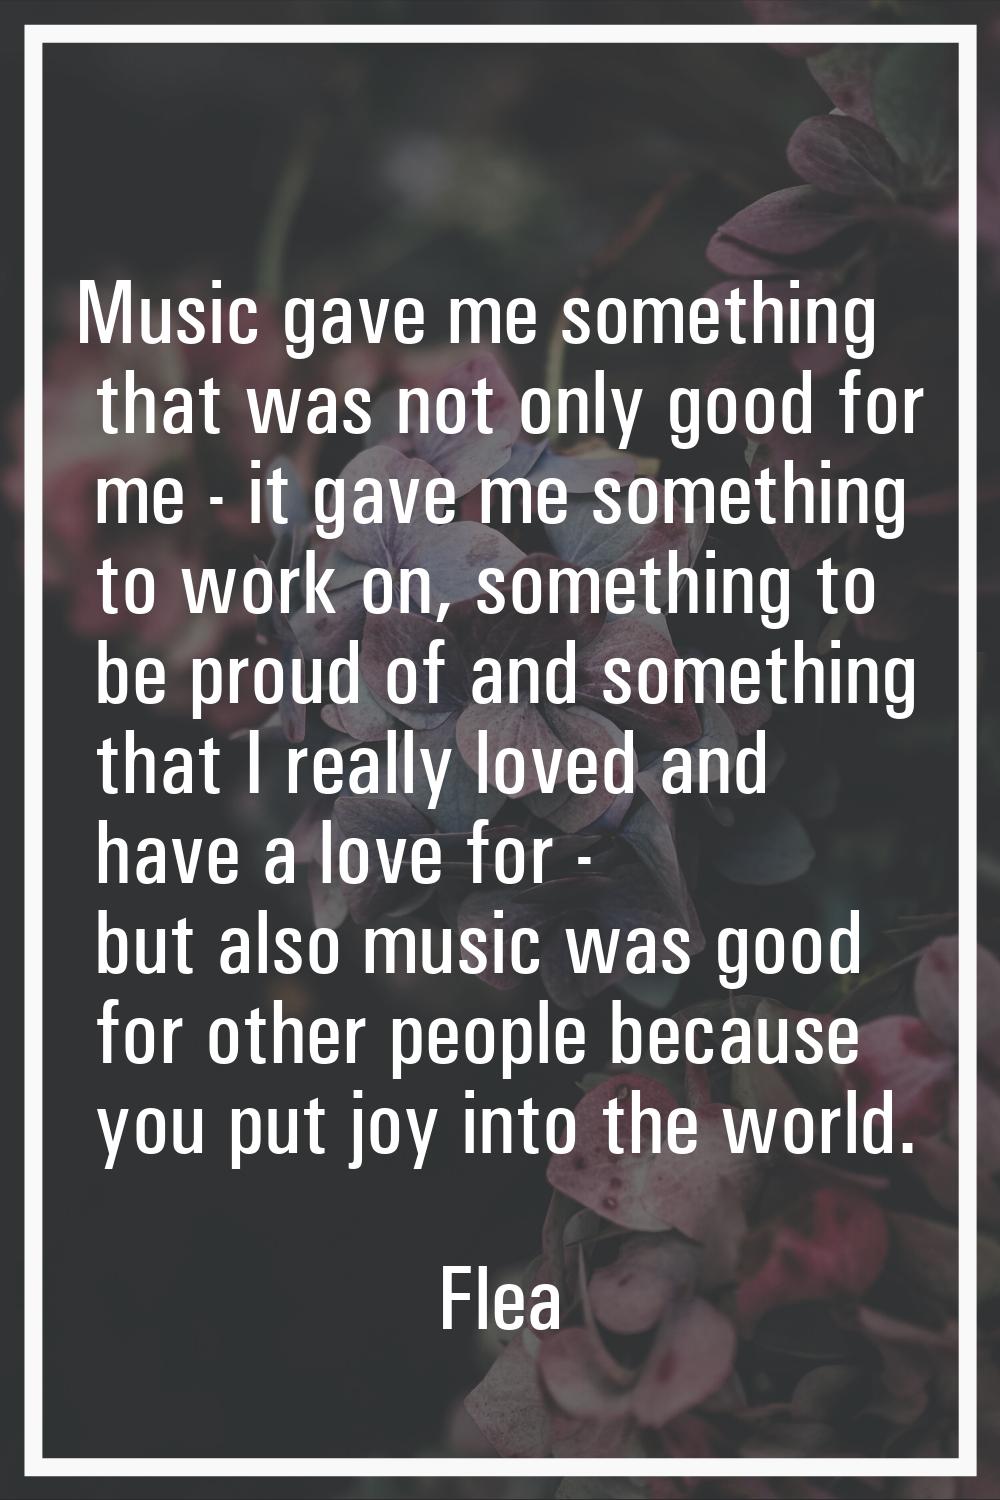 Music gave me something that was not only good for me - it gave me something to work on, something 